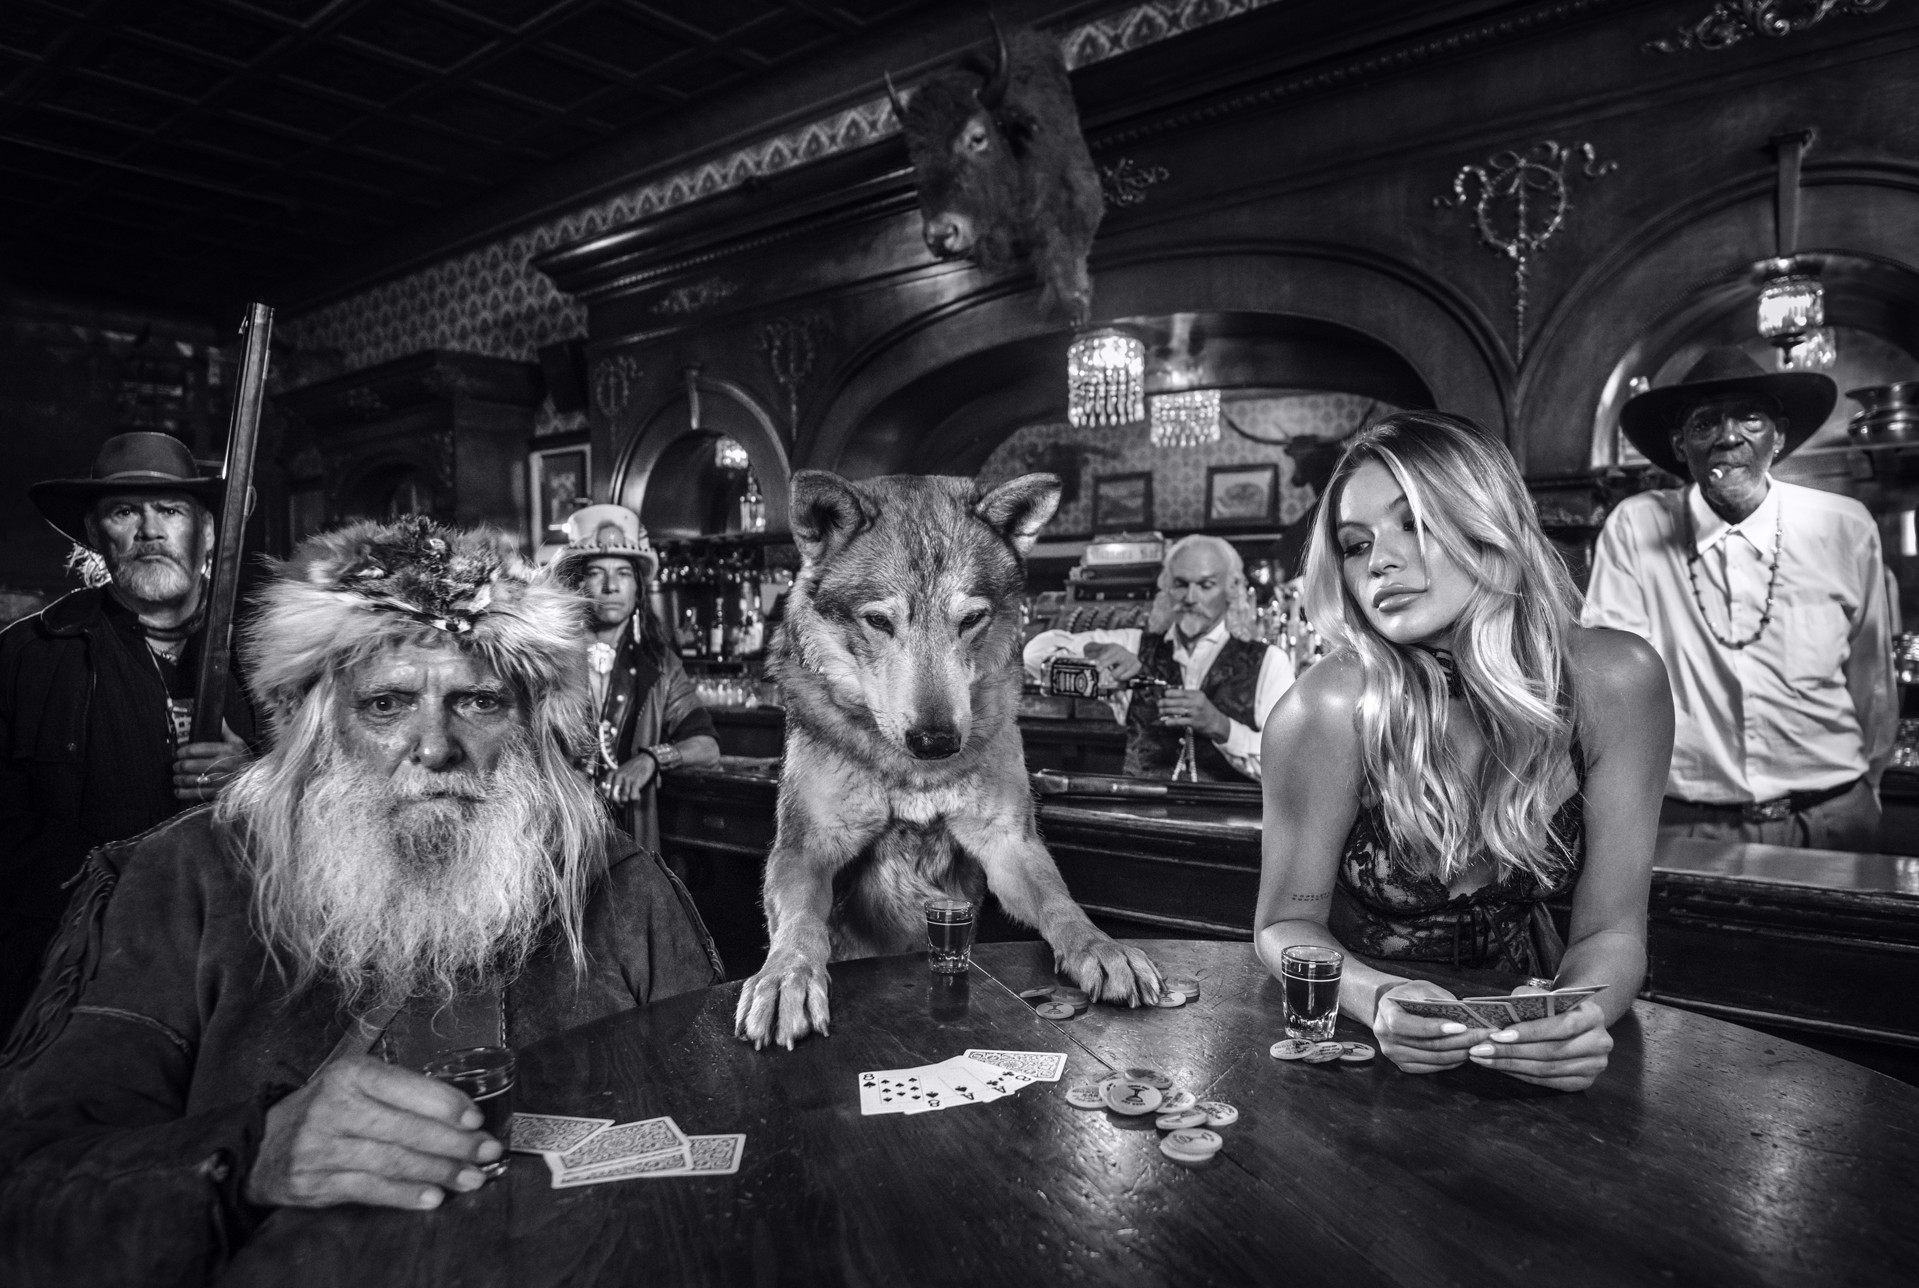 Aces and Eights (4/12) by David Yarrow